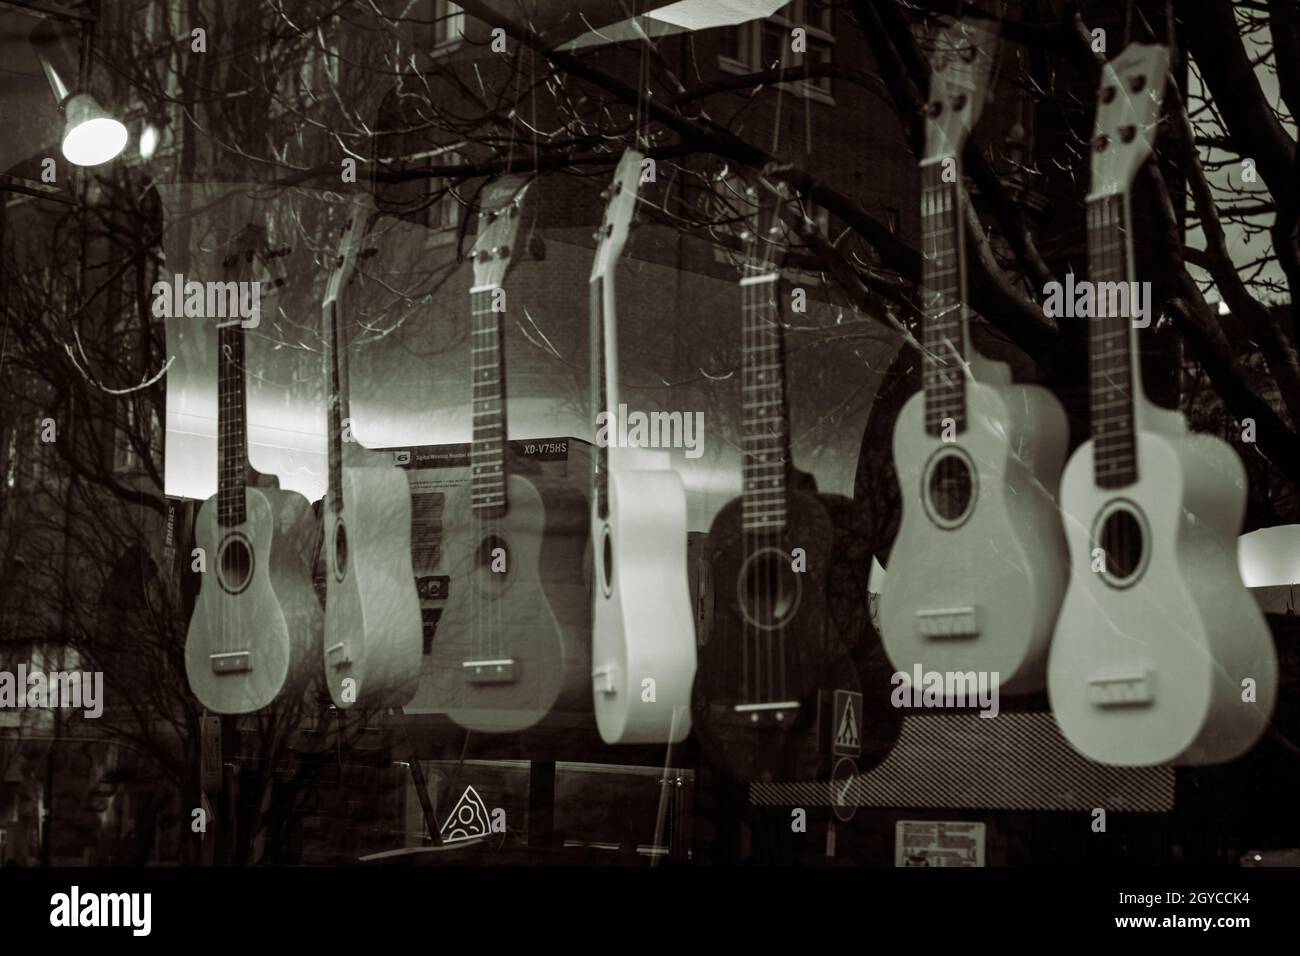 Musik Shop High Resolution Stock Photography and Images - Alamy